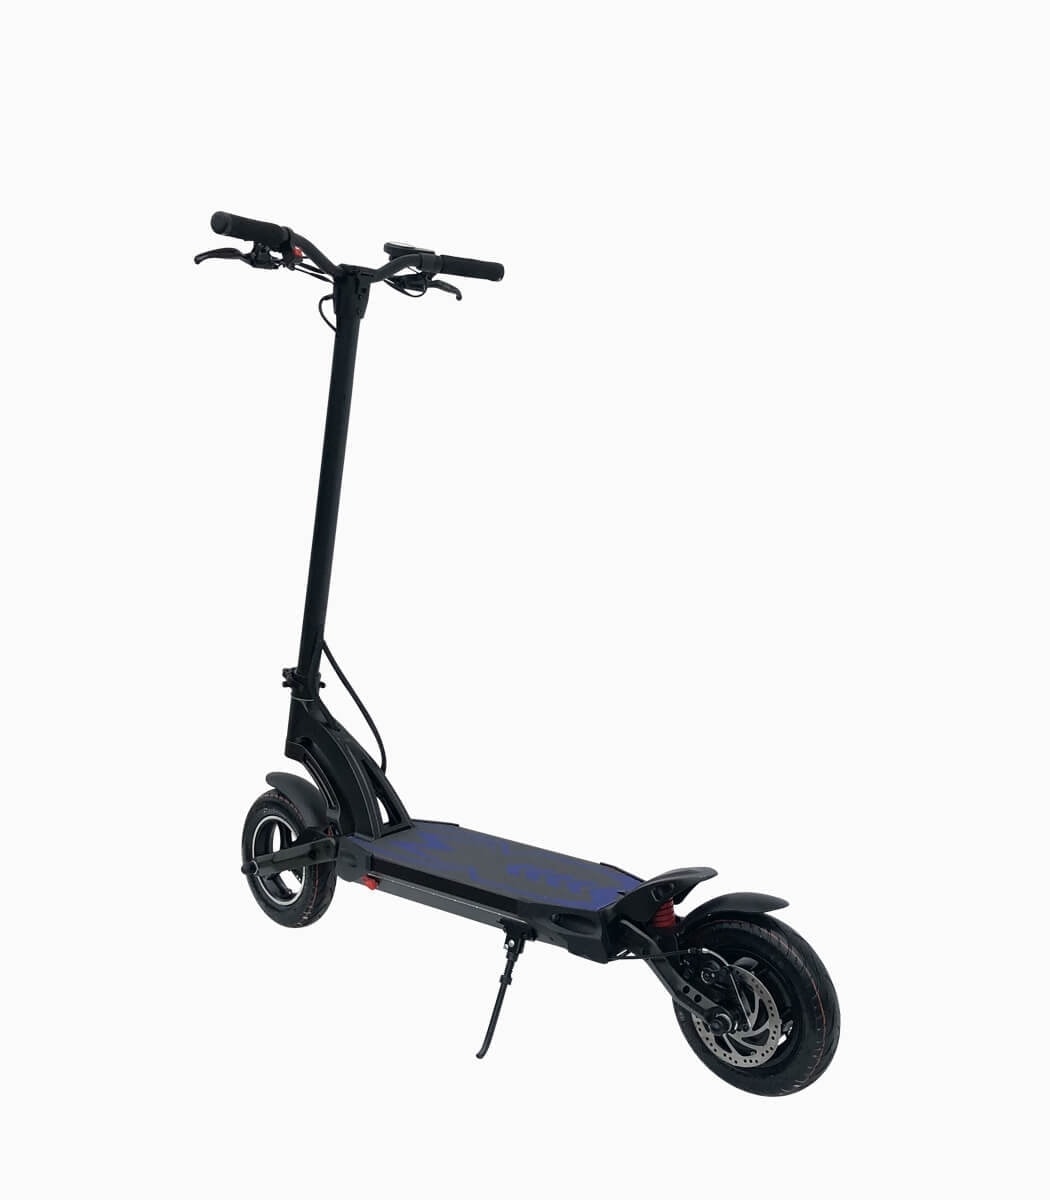 MOBOT MANTIS (BLACK10AH) UL2272 certified high performance electric scooter rear angled left